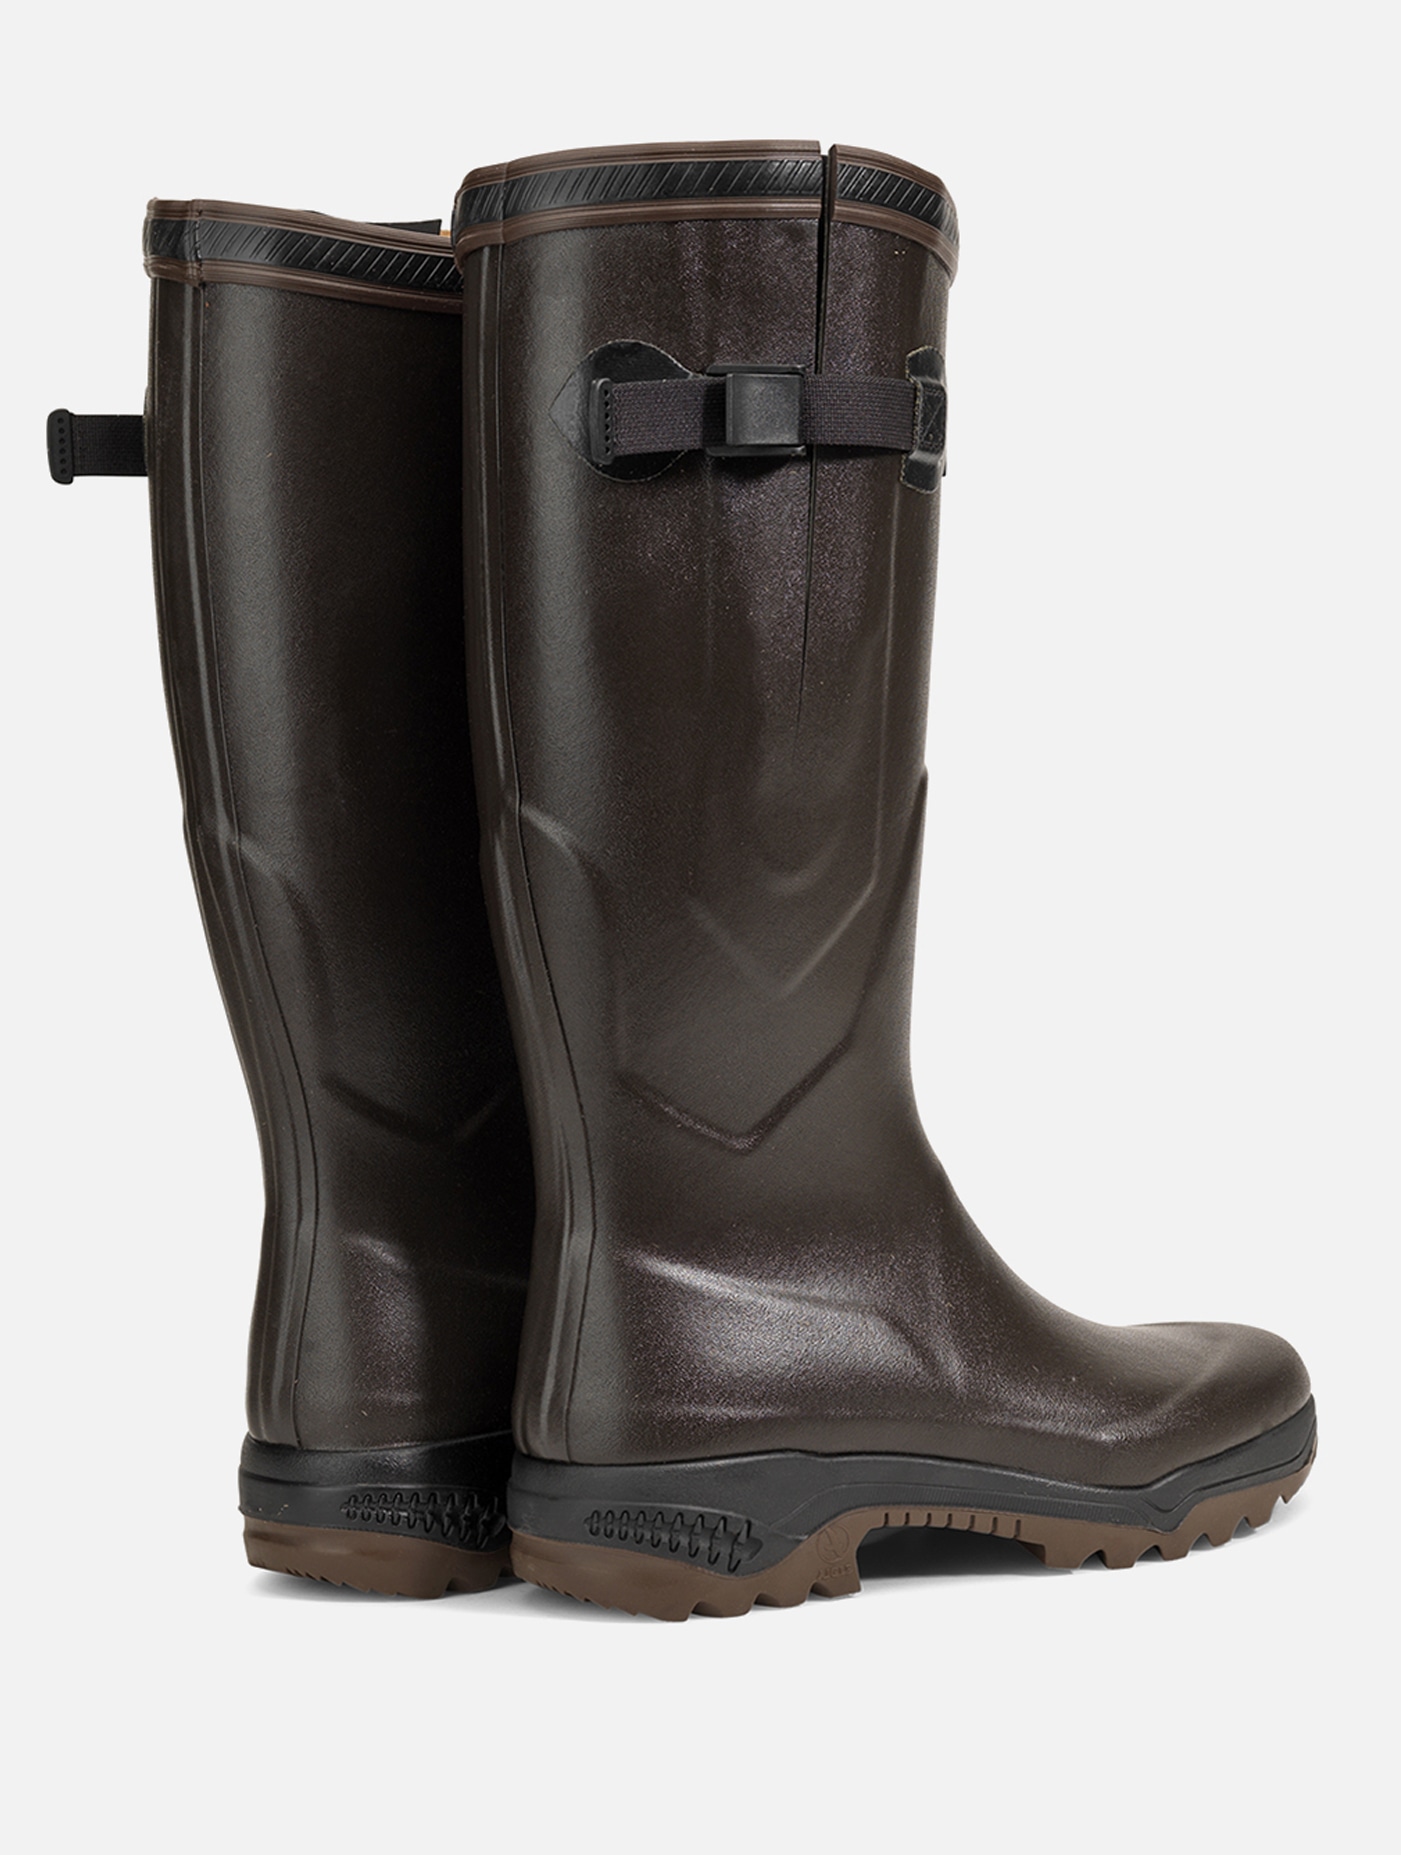 Aigle - Adjustable anti-fatigue boots, Made in France Bronze - Parcours® 2 | AIGLE